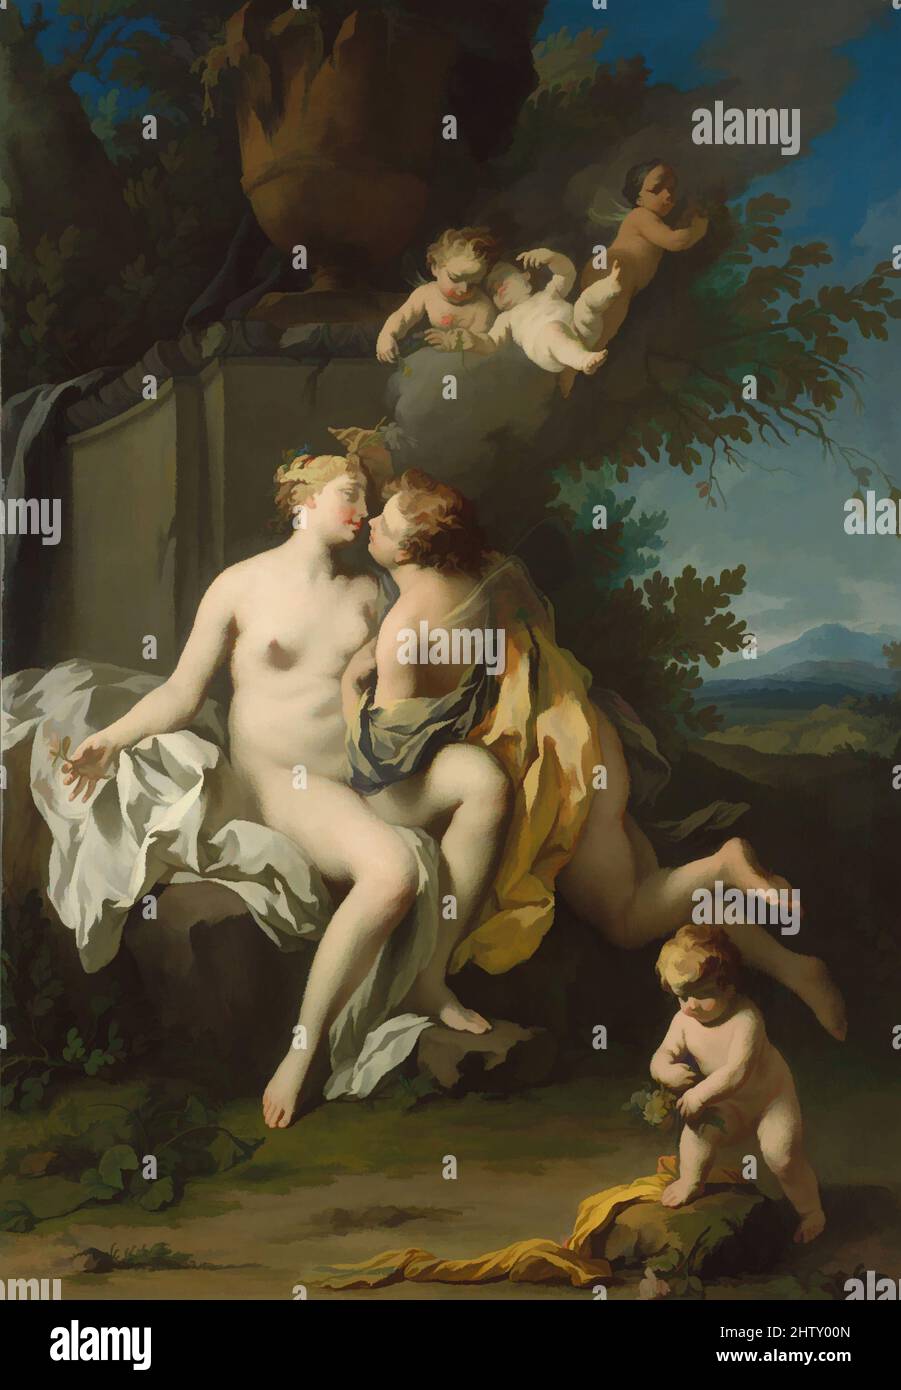 Art inspired by Flora and Zephyr, 1730s, Oil on canvas, 84 x 58 in. (213.4 x 147.3 cm), Paintings, Jacopo Amigoni (Italian, Venice 1682–1752 Madrid), The Venetians Sebastiano Ricci, Giovanni Pellegrini, Giovanni Battista Tiepolo, and Amigoni all worked throughout Europe, achieving, Classic works modernized by Artotop with a splash of modernity. Shapes, color and value, eye-catching visual impact on art. Emotions through freedom of artworks in a contemporary way. A timeless message pursuing a wildly creative new direction. Artists turning to the digital medium and creating the Artotop NFT Stock Photo